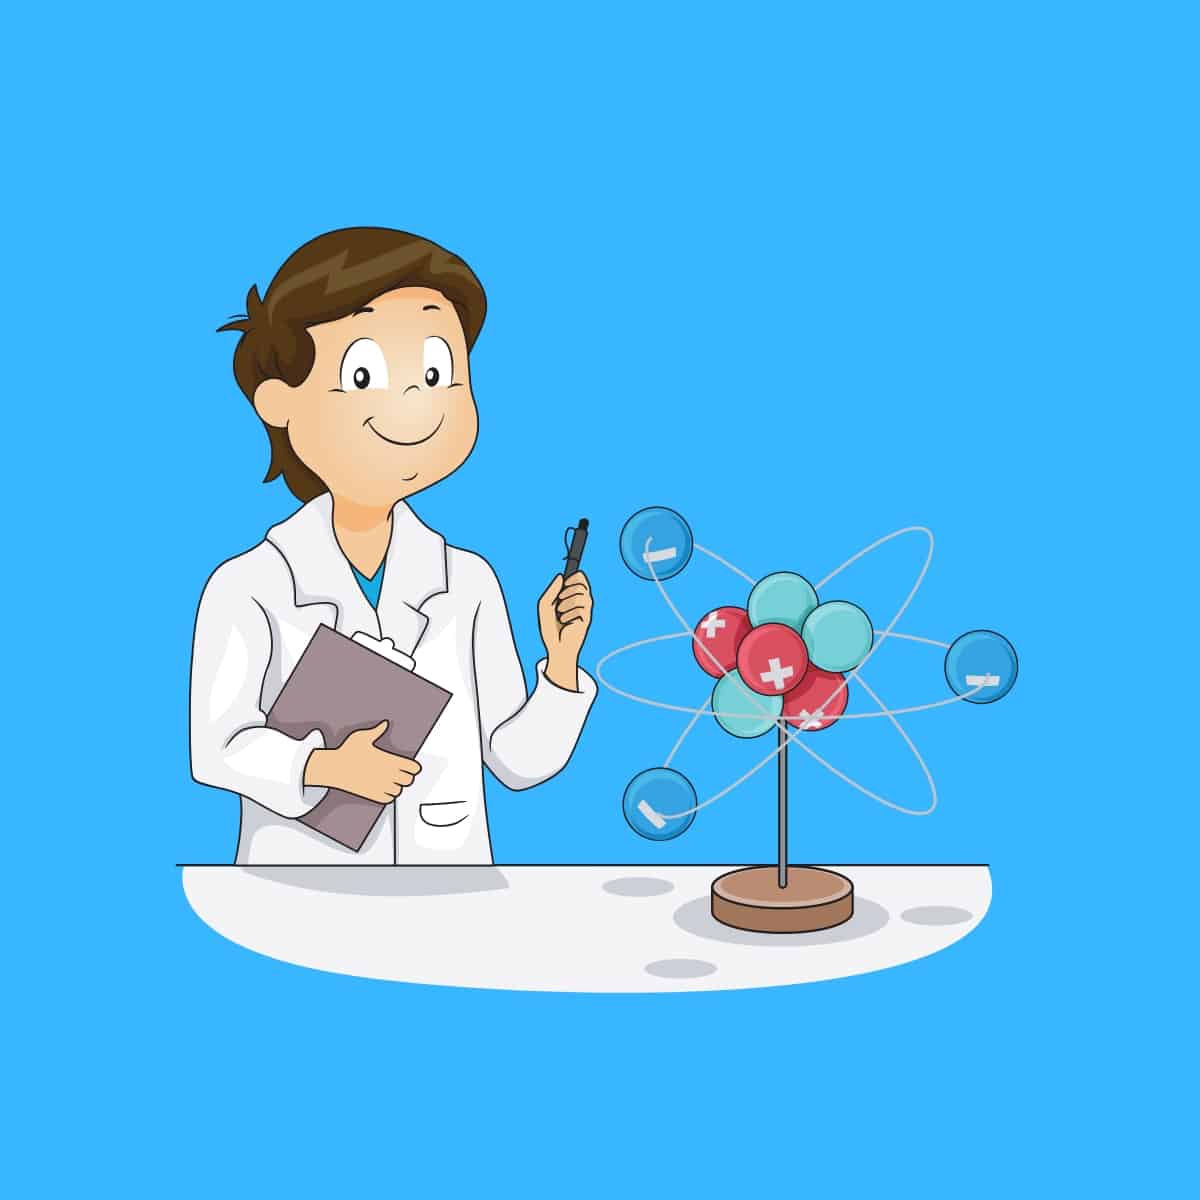 Cartoon graphic of a scientist looking at a molecule structure from the periodic table on a table on a blue background.